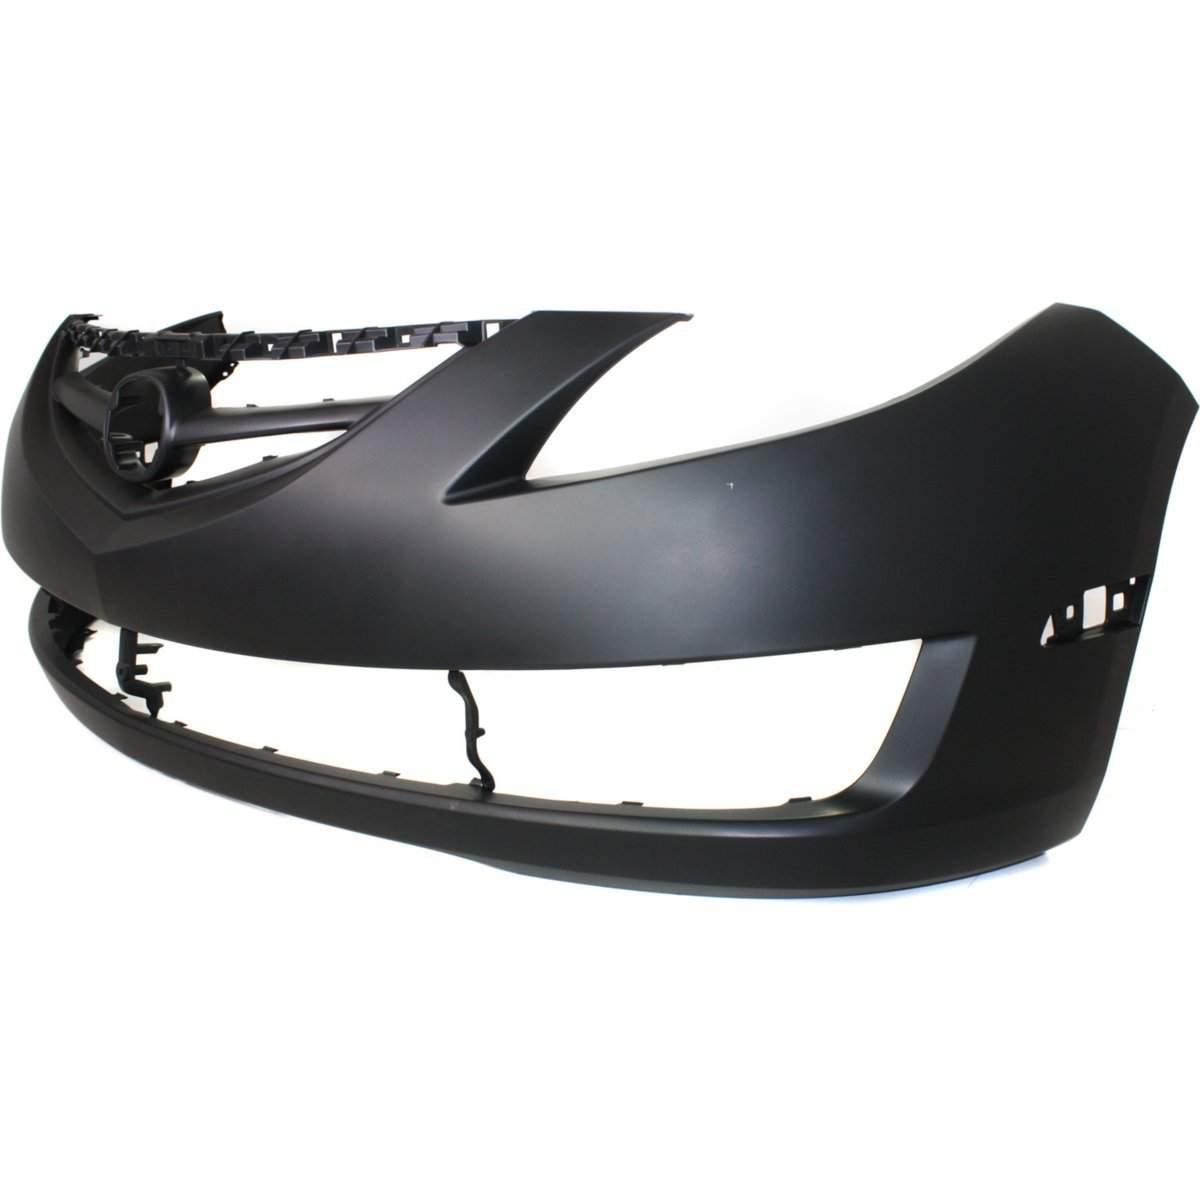 2009-2013 MAZDA 6 Front Bumper Cover Painted to Match